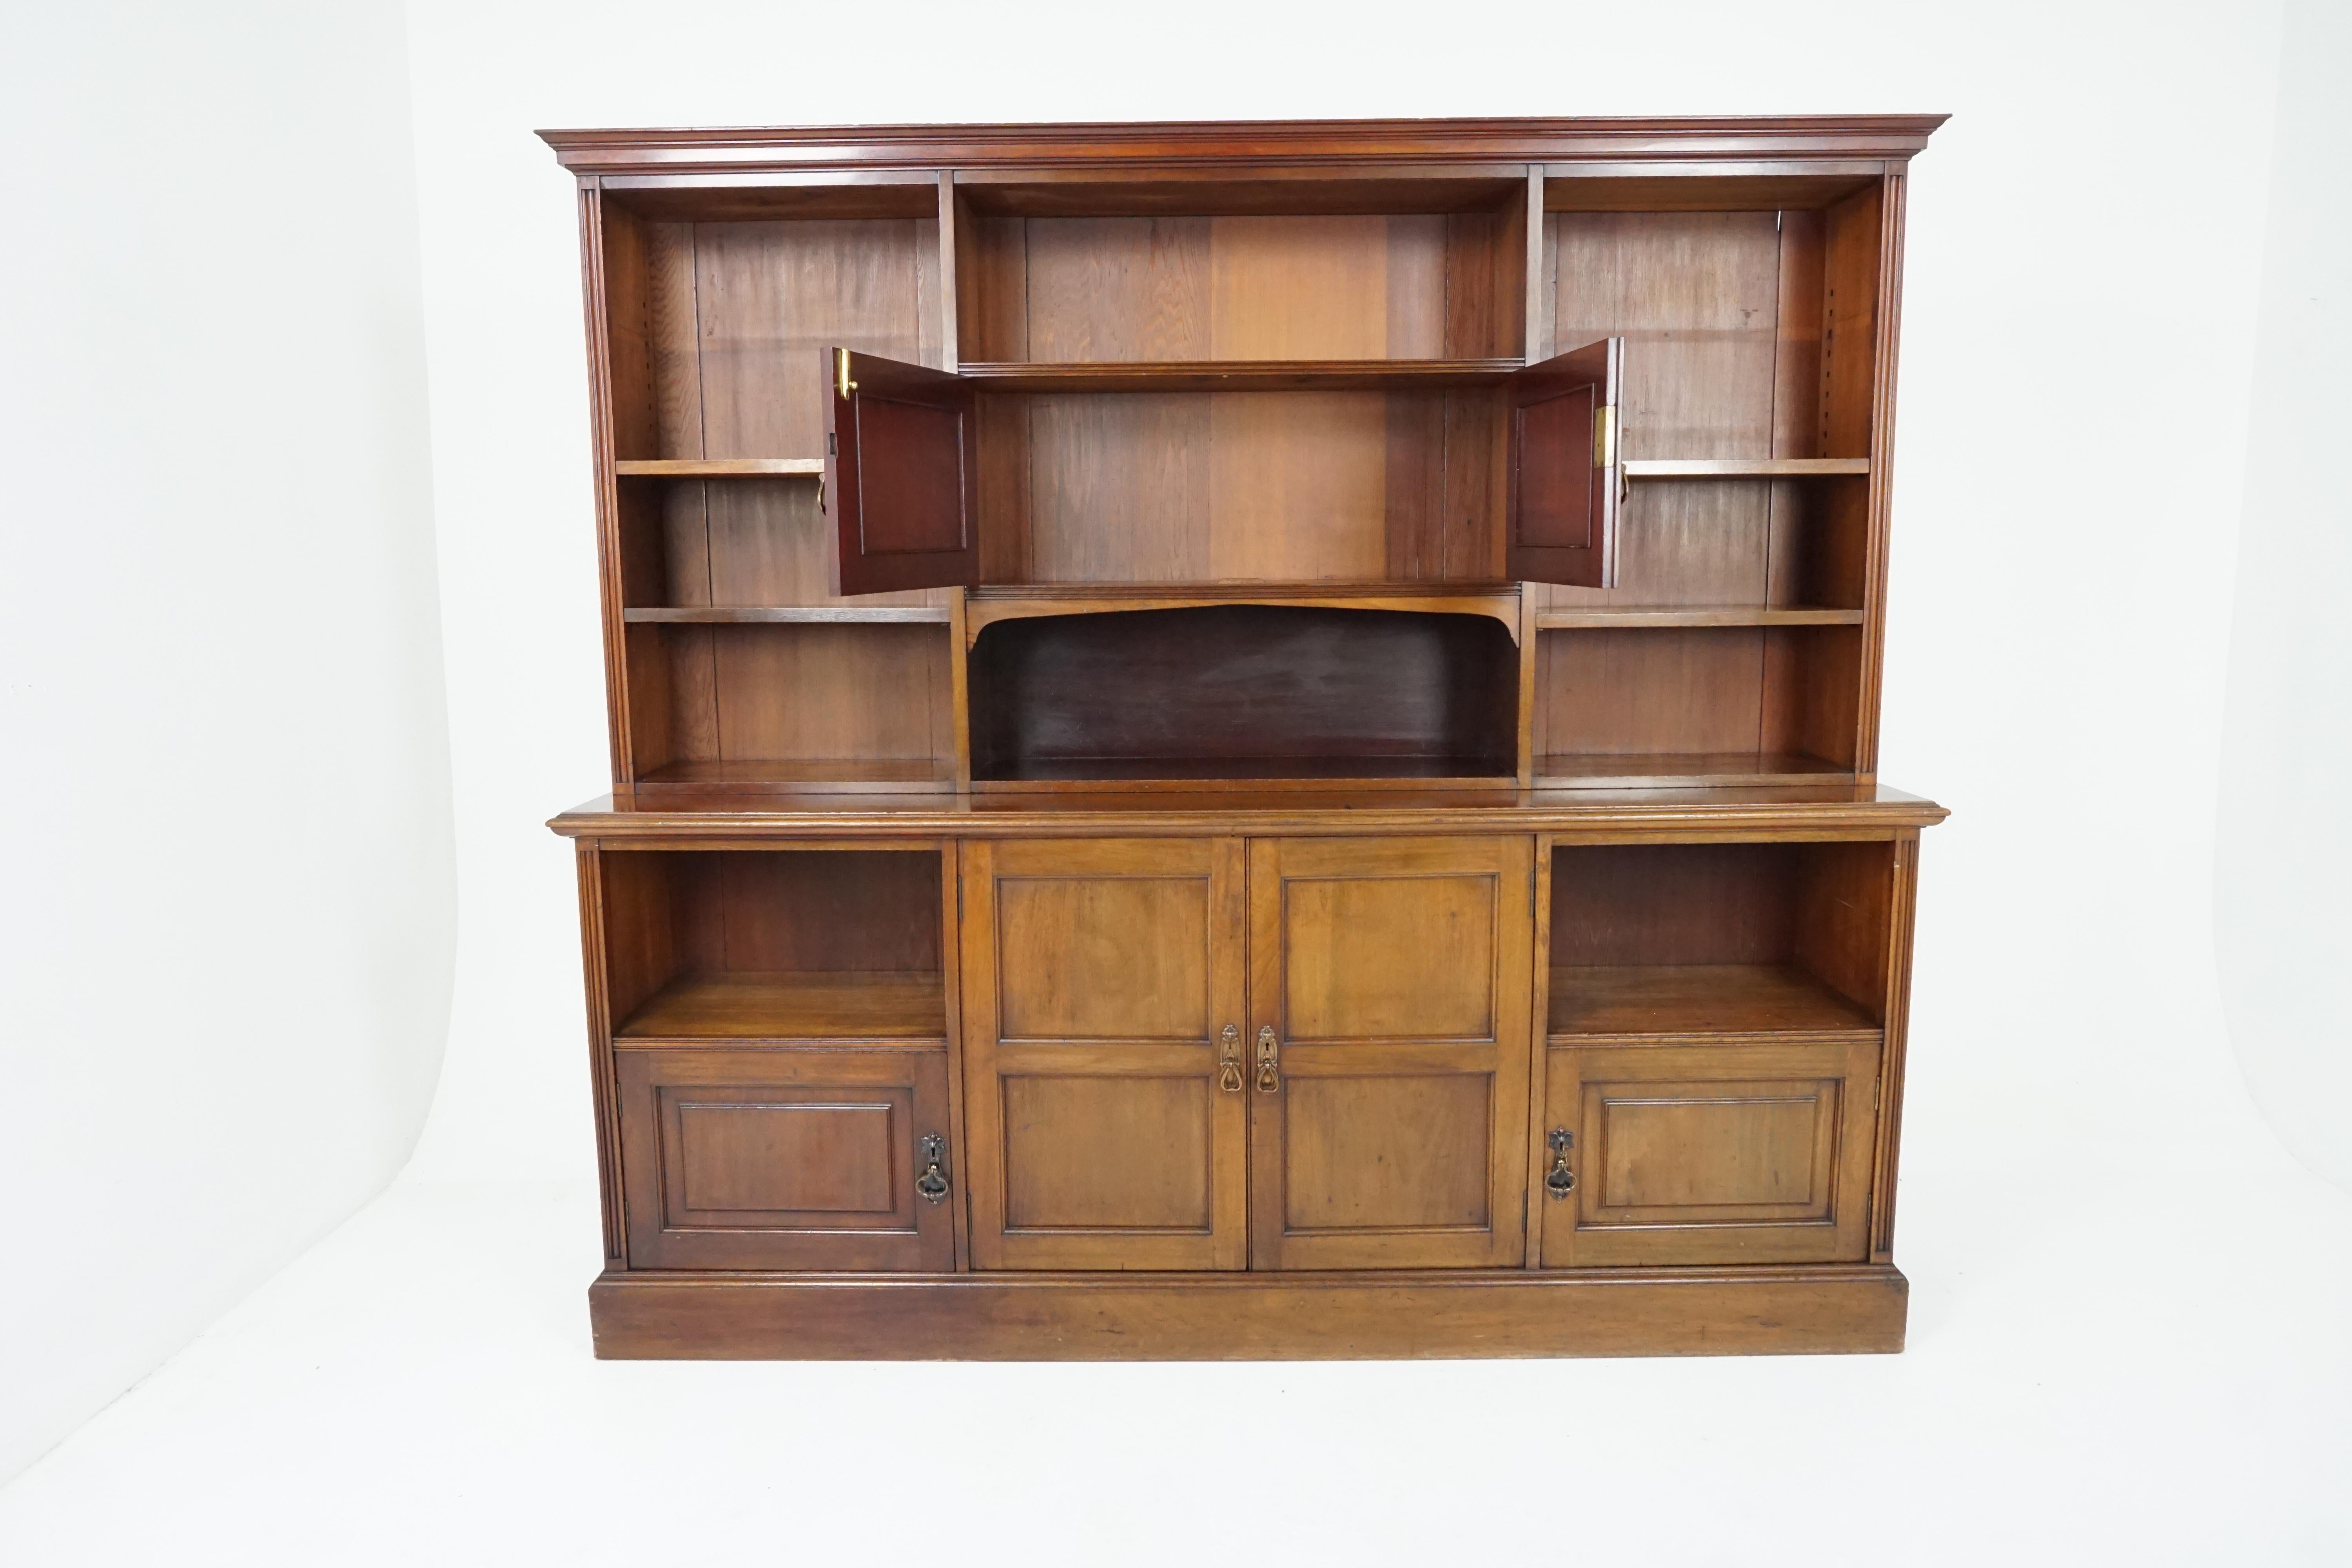 Antique Victorian walnut open bookcase, Scotland 1875, H519

Scotland 1875
Solid walnut
Original finish
Overhanging cornice
Open bookcase underneath
Two paneled doors in the center
Base has two paneled doors that open to reveal single shelf, with